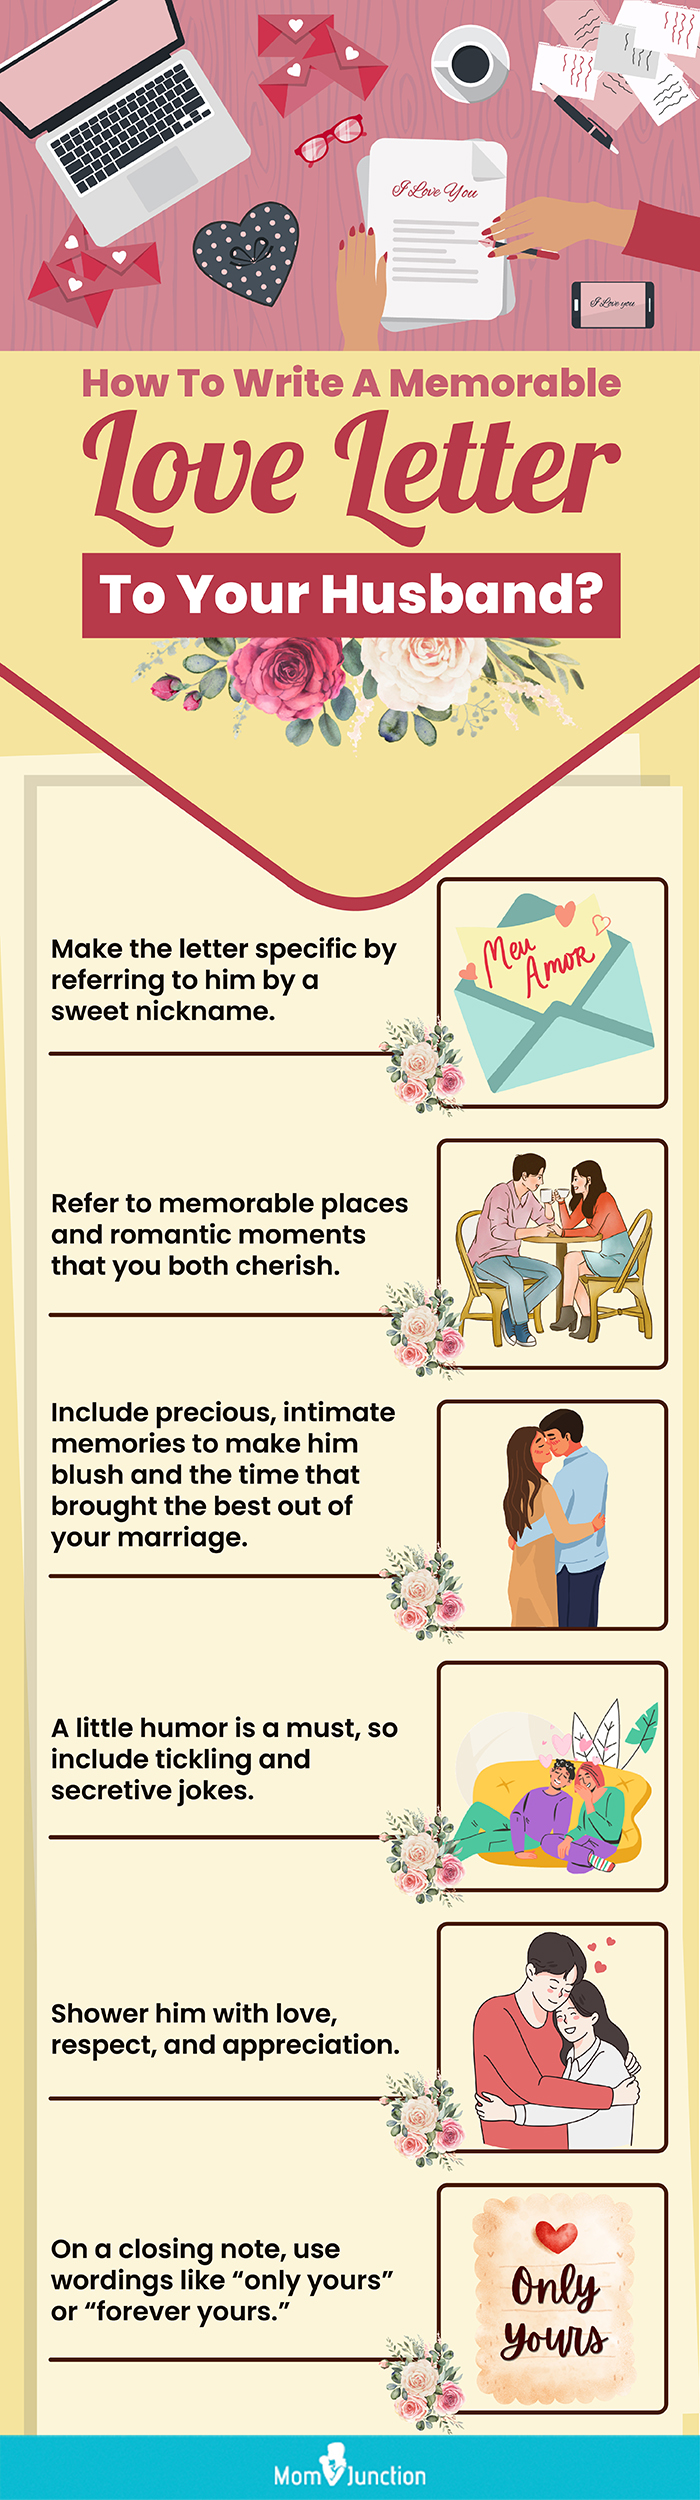 love letter to your husband [infographic]